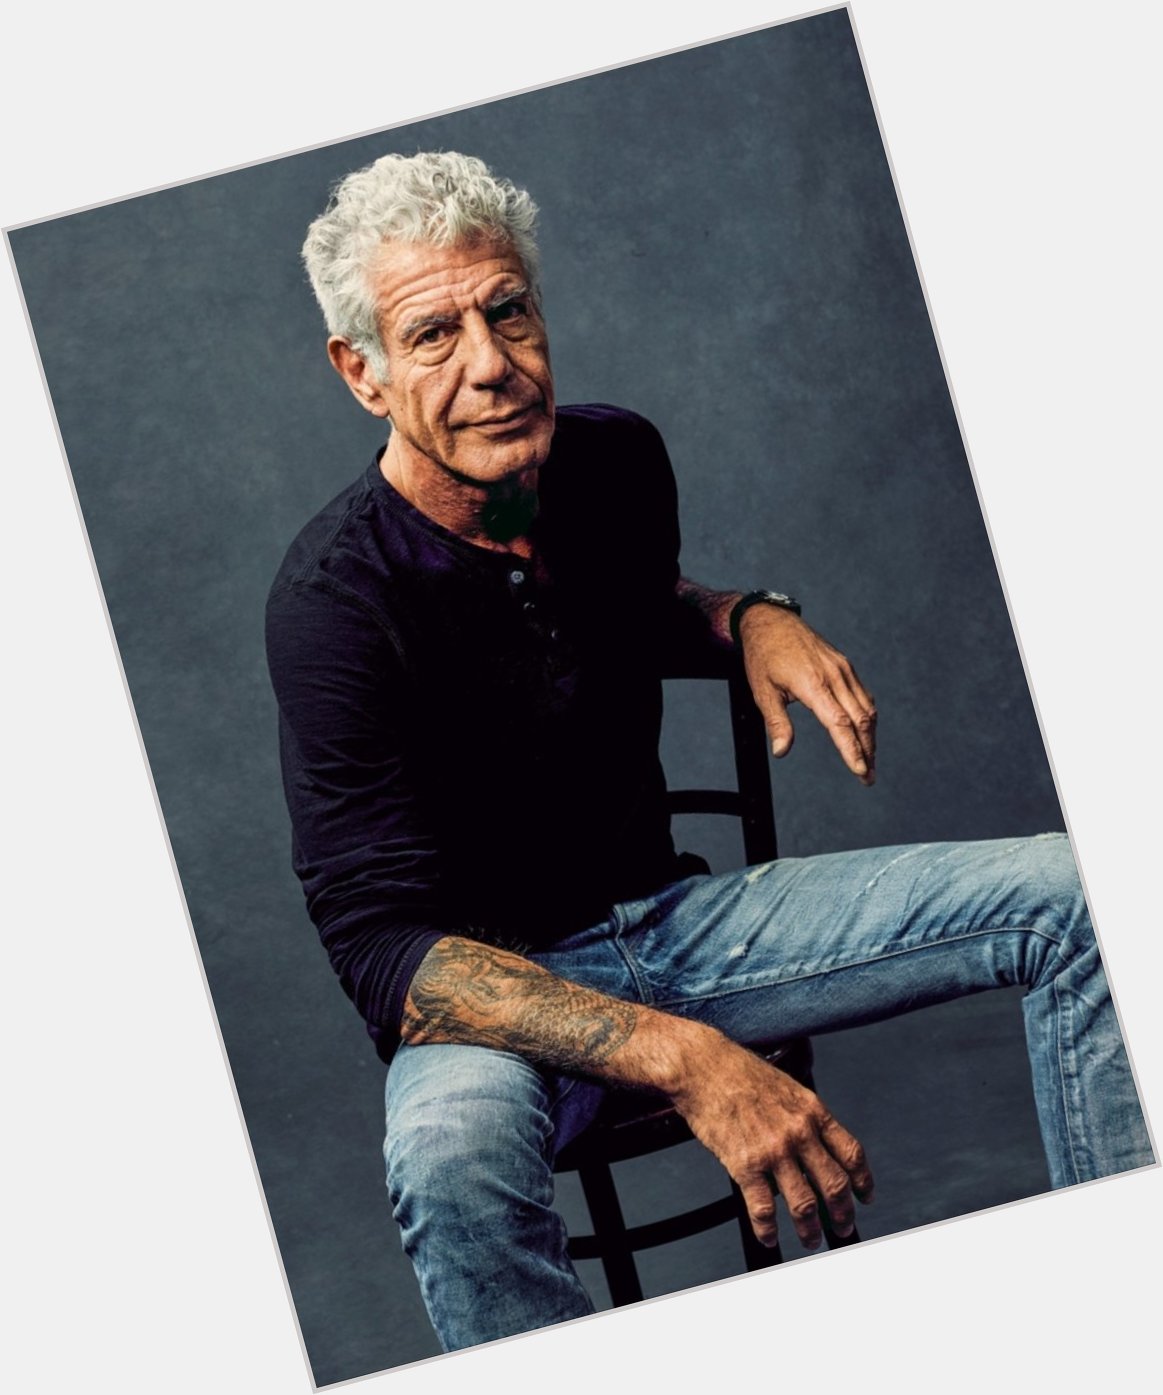 Anthony Bourdain (June 25, 1956 - June 8, 2018) 

Happy birthday to you. And may you continue to rest in peace. 